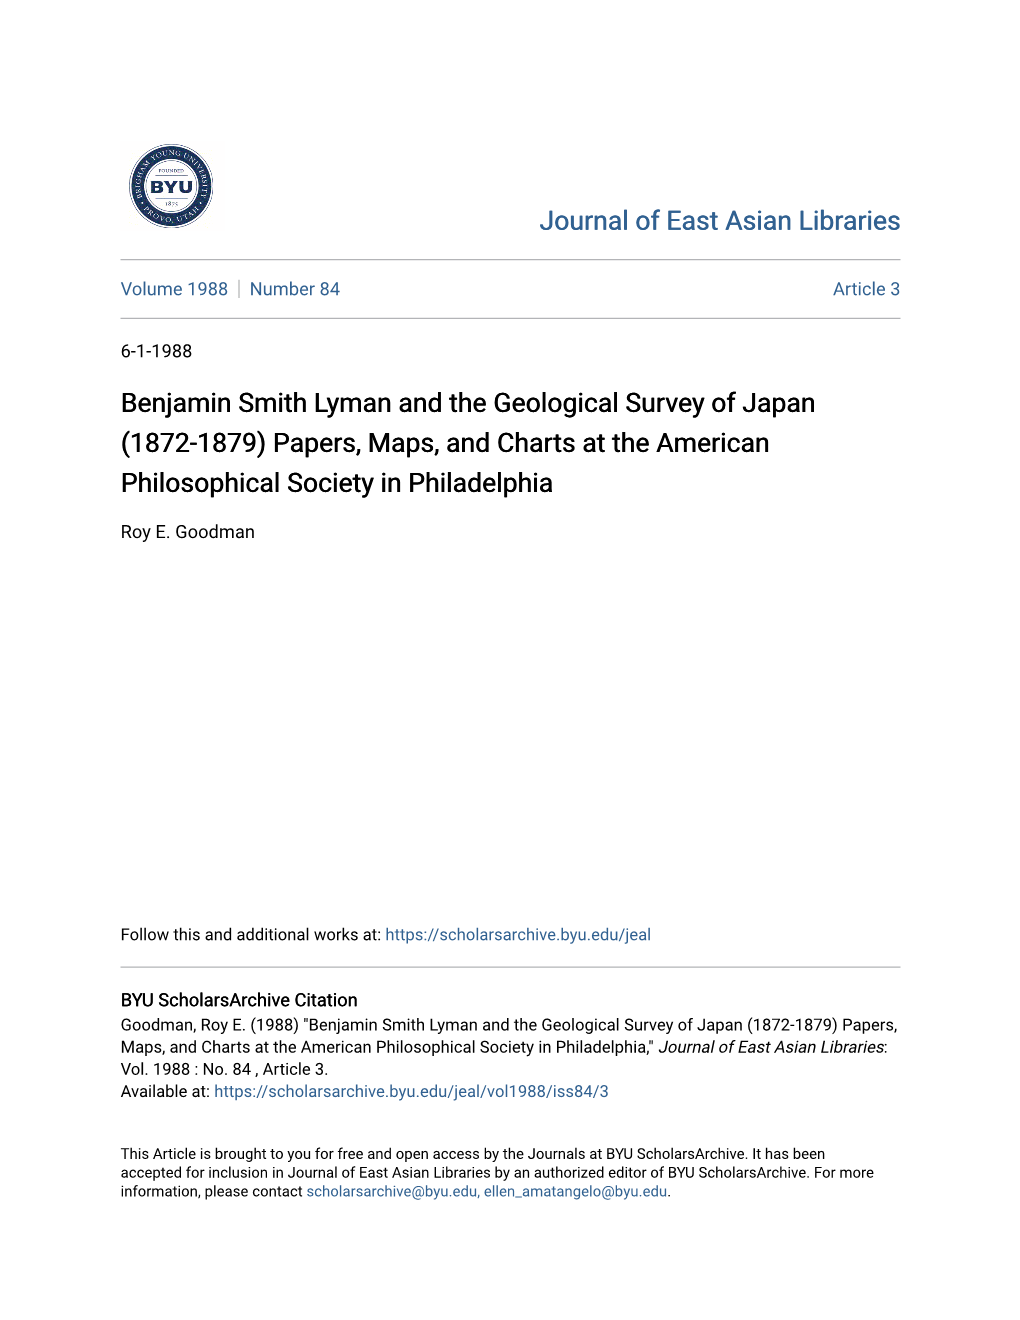 Benjamin Smith Lyman and the Geological Survey of Japan (1872-1879) Papers, Maps, and Charts at the American Philosophical Society in Philadelphia